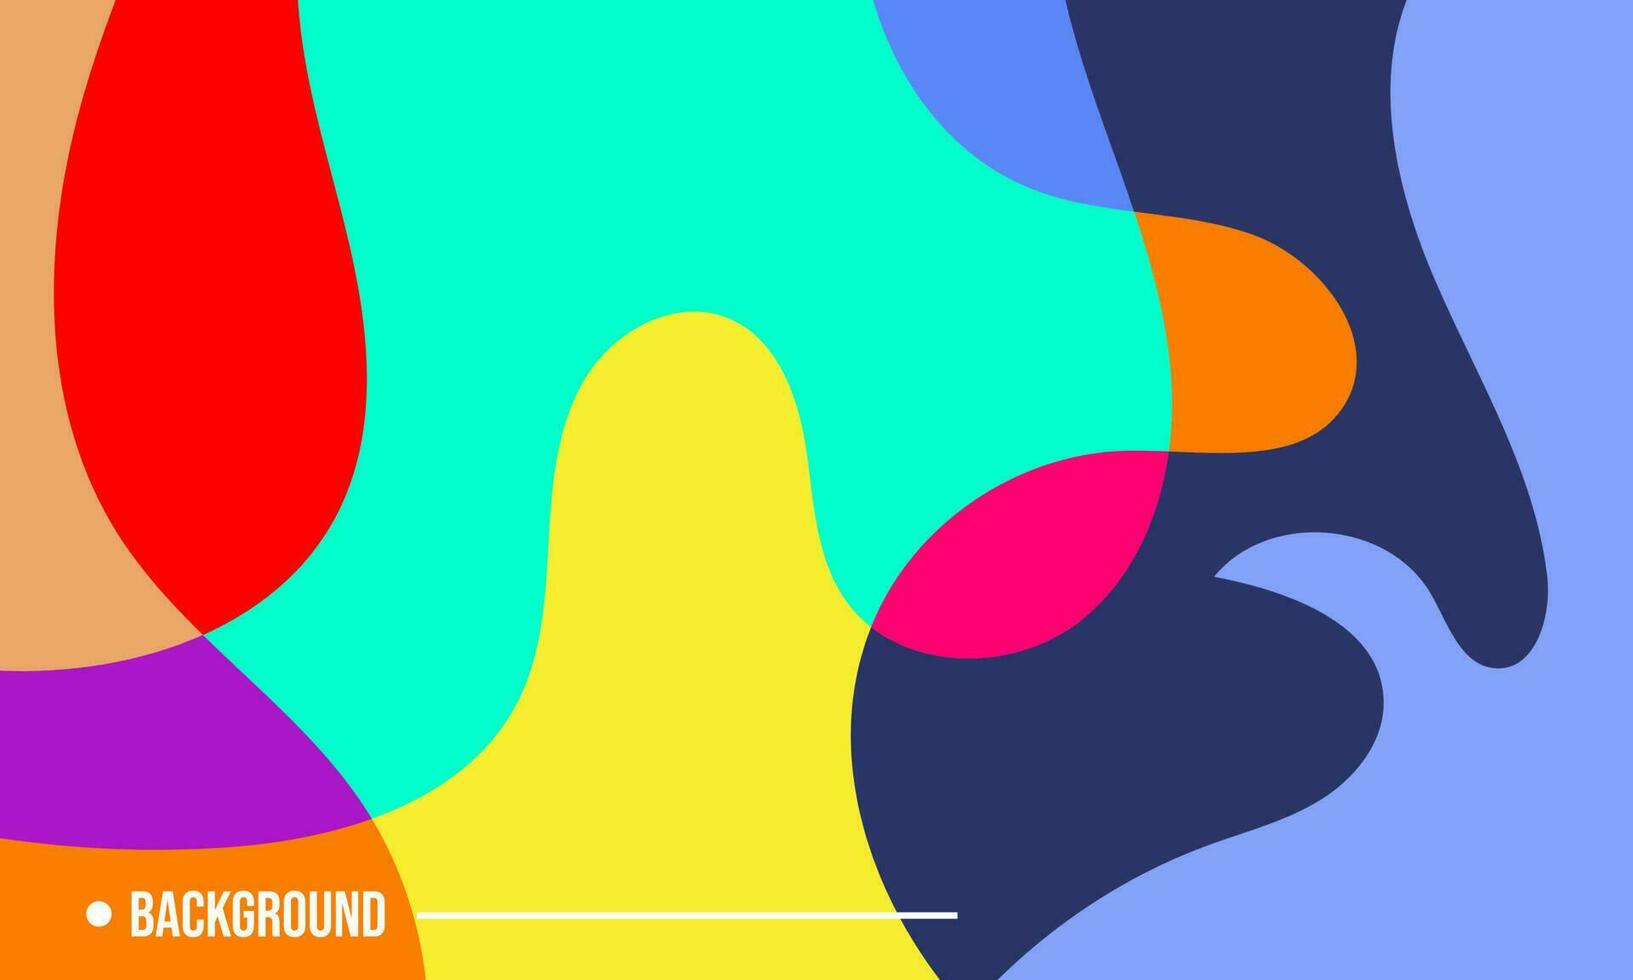 Colorful Abstract Fluid and Geometric Flat Background. Vector Flat Wallpaper Eps 10